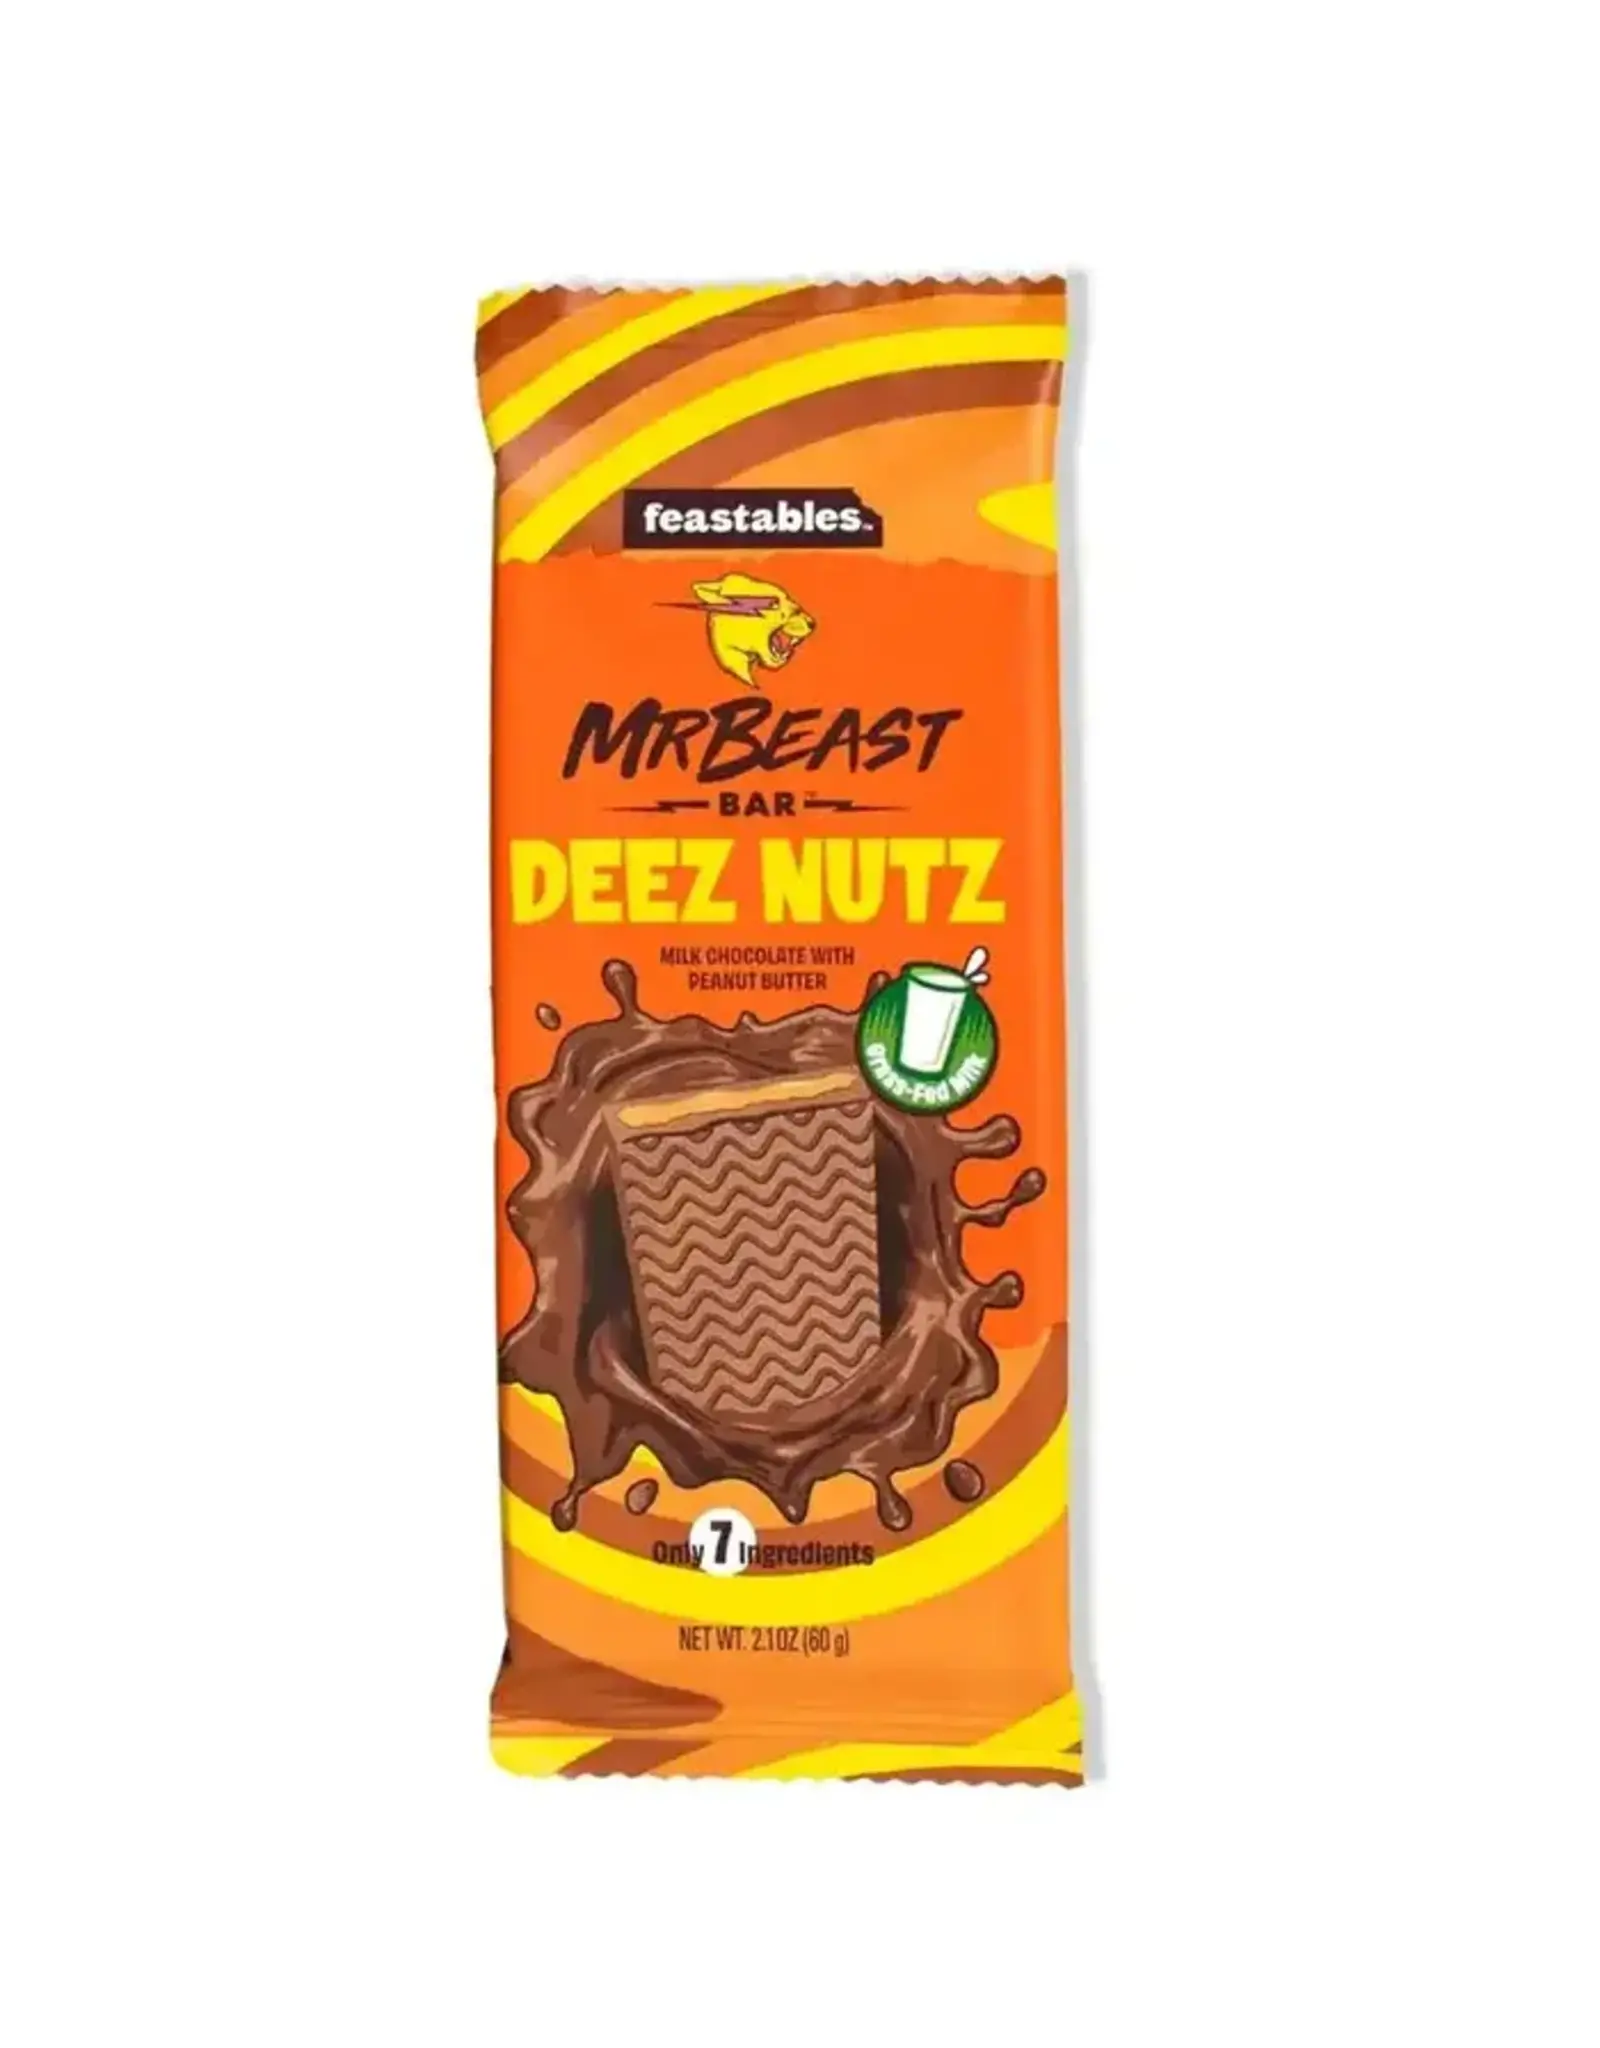 Mr Beast Feastables Chocolate Bar -  Deez Nuts Milk Chocolate With Peanut Butter - 60g